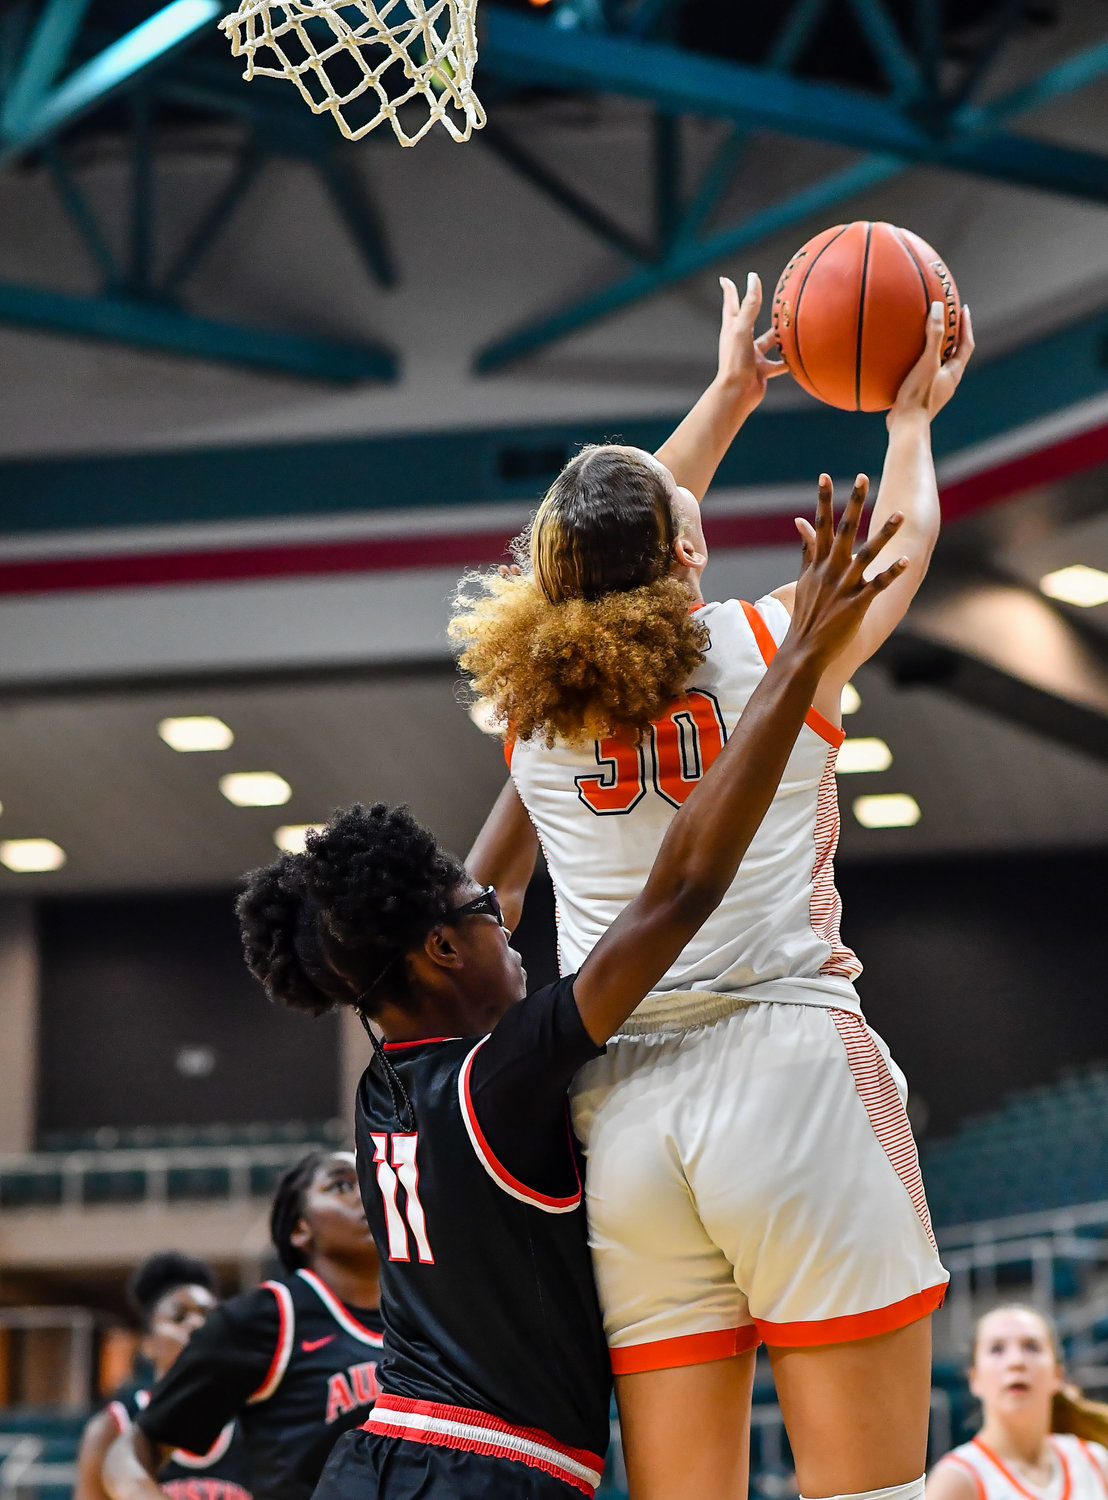 Katy Tx. Feb 22, 2022:  Seven Lakes Justice Carlton #30 gets the shot off over her shoulder scoring for the Spartans during the Regional Quarterfinal playoff game, Seven Lakes vs Fort Bend Austin at the Merrell Center. (Photo by Mark Goodman / Katy Times)